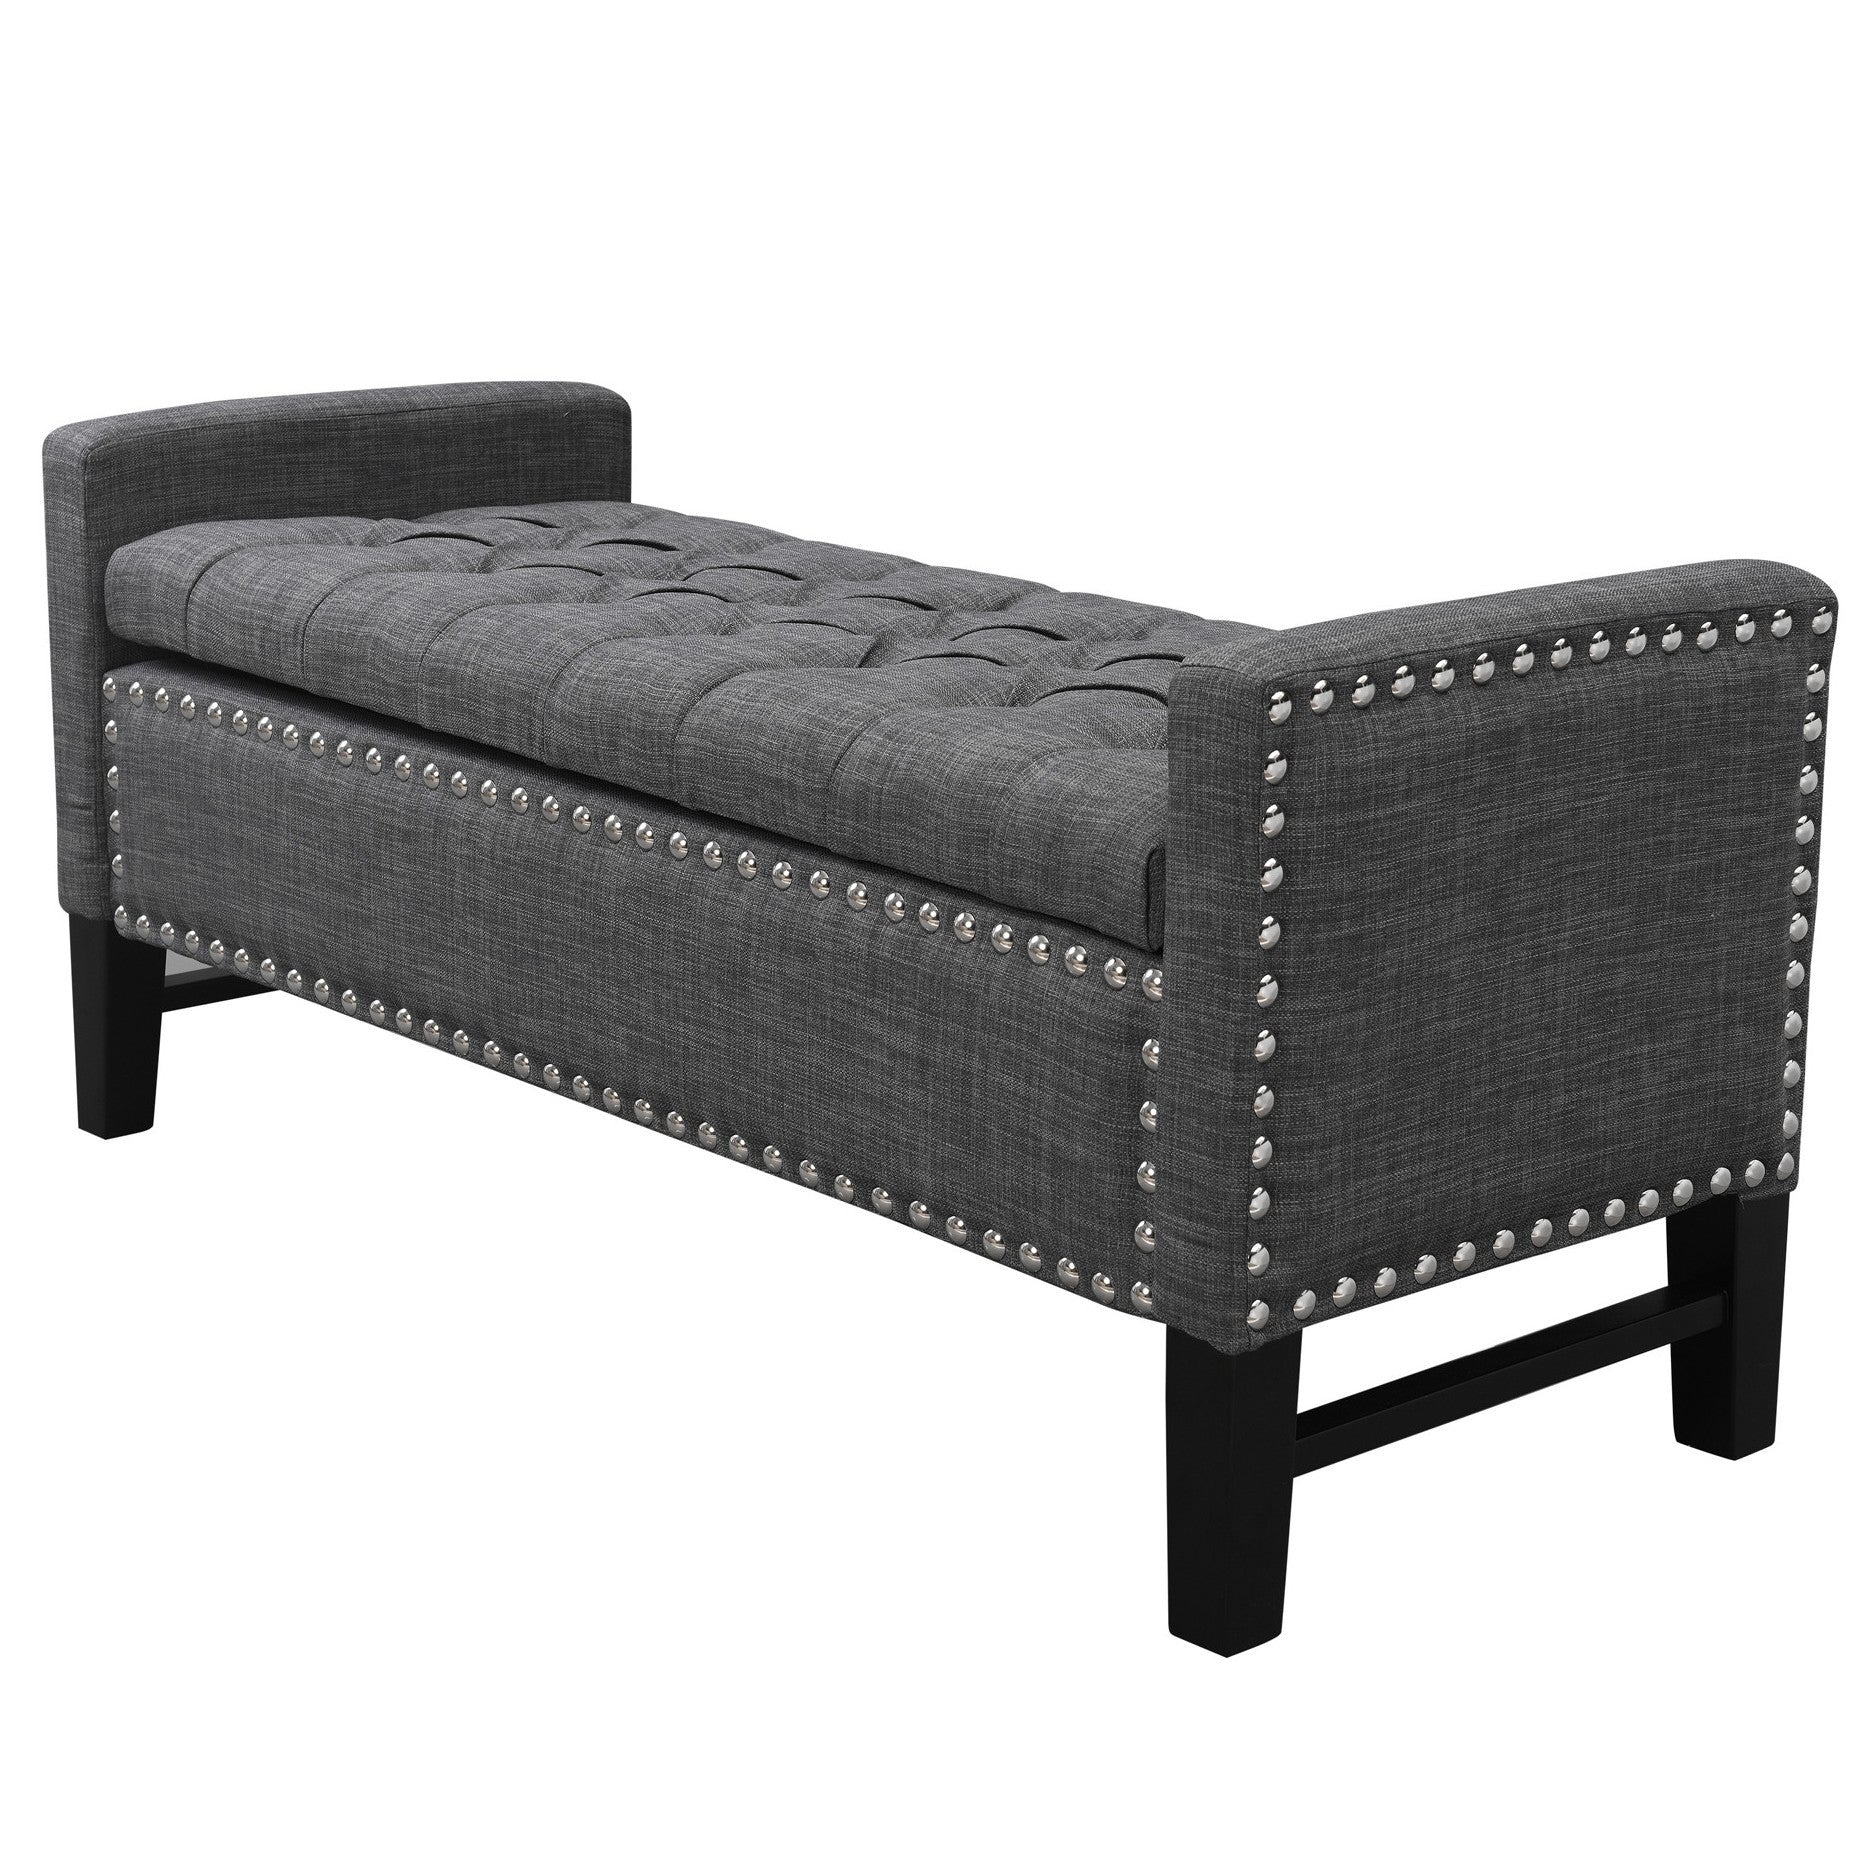 50" Espresso Upholstered PU Leather Bench with Flip top, Shoe Storage